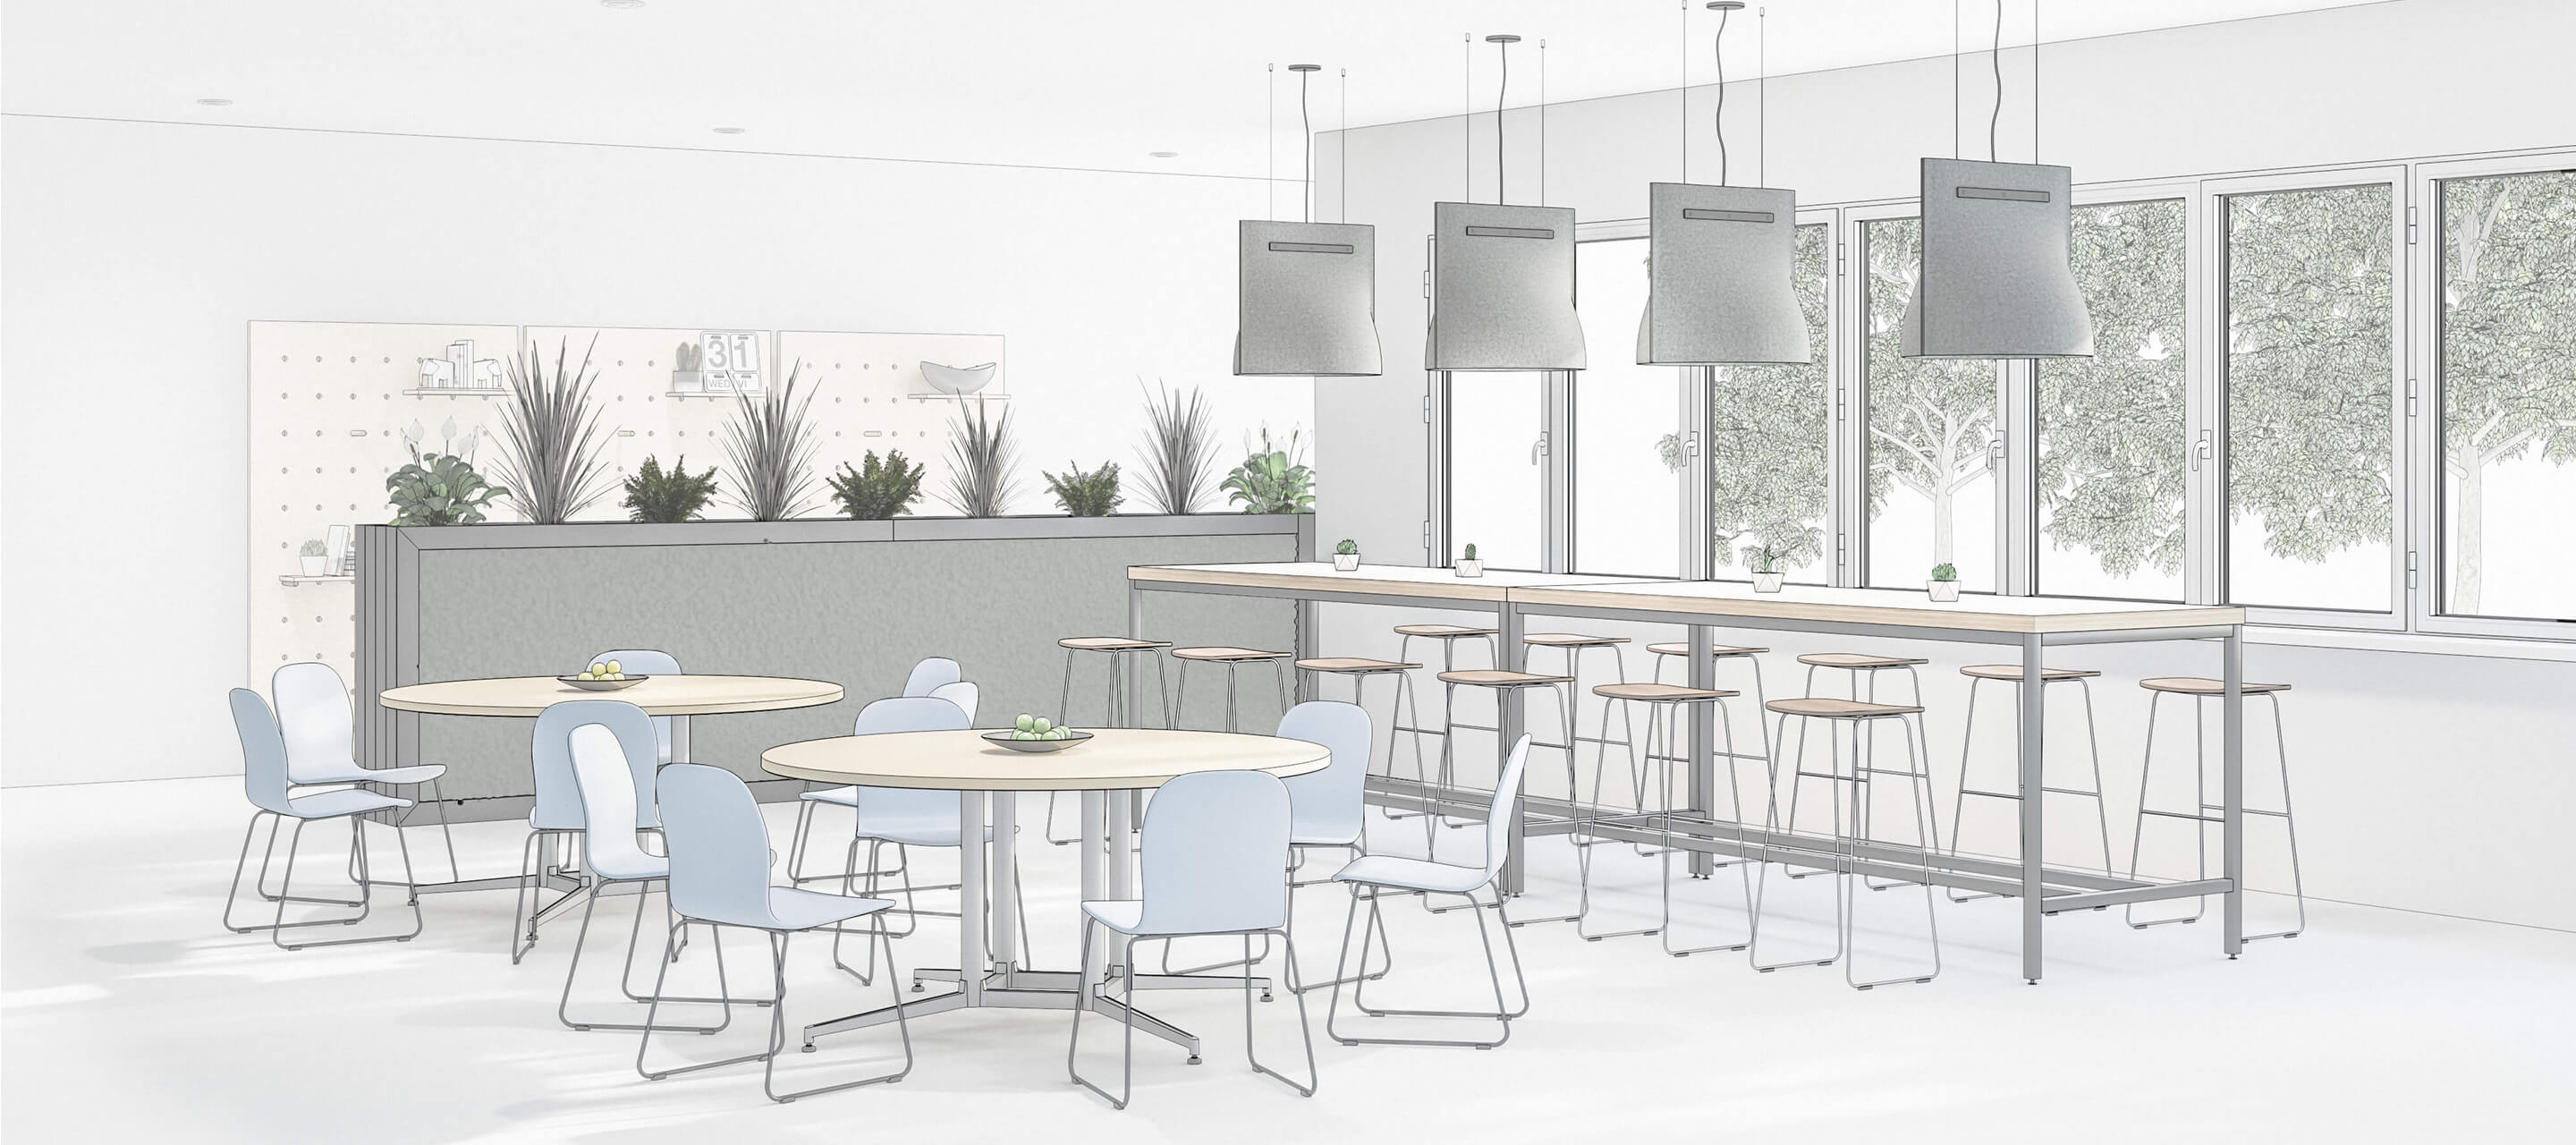 Haworth Cafe Idea Starter with tall tables and round tables with chairs around them and lights coming down from the ceiling and tall storage area with plants on it looking out to trees with large windows